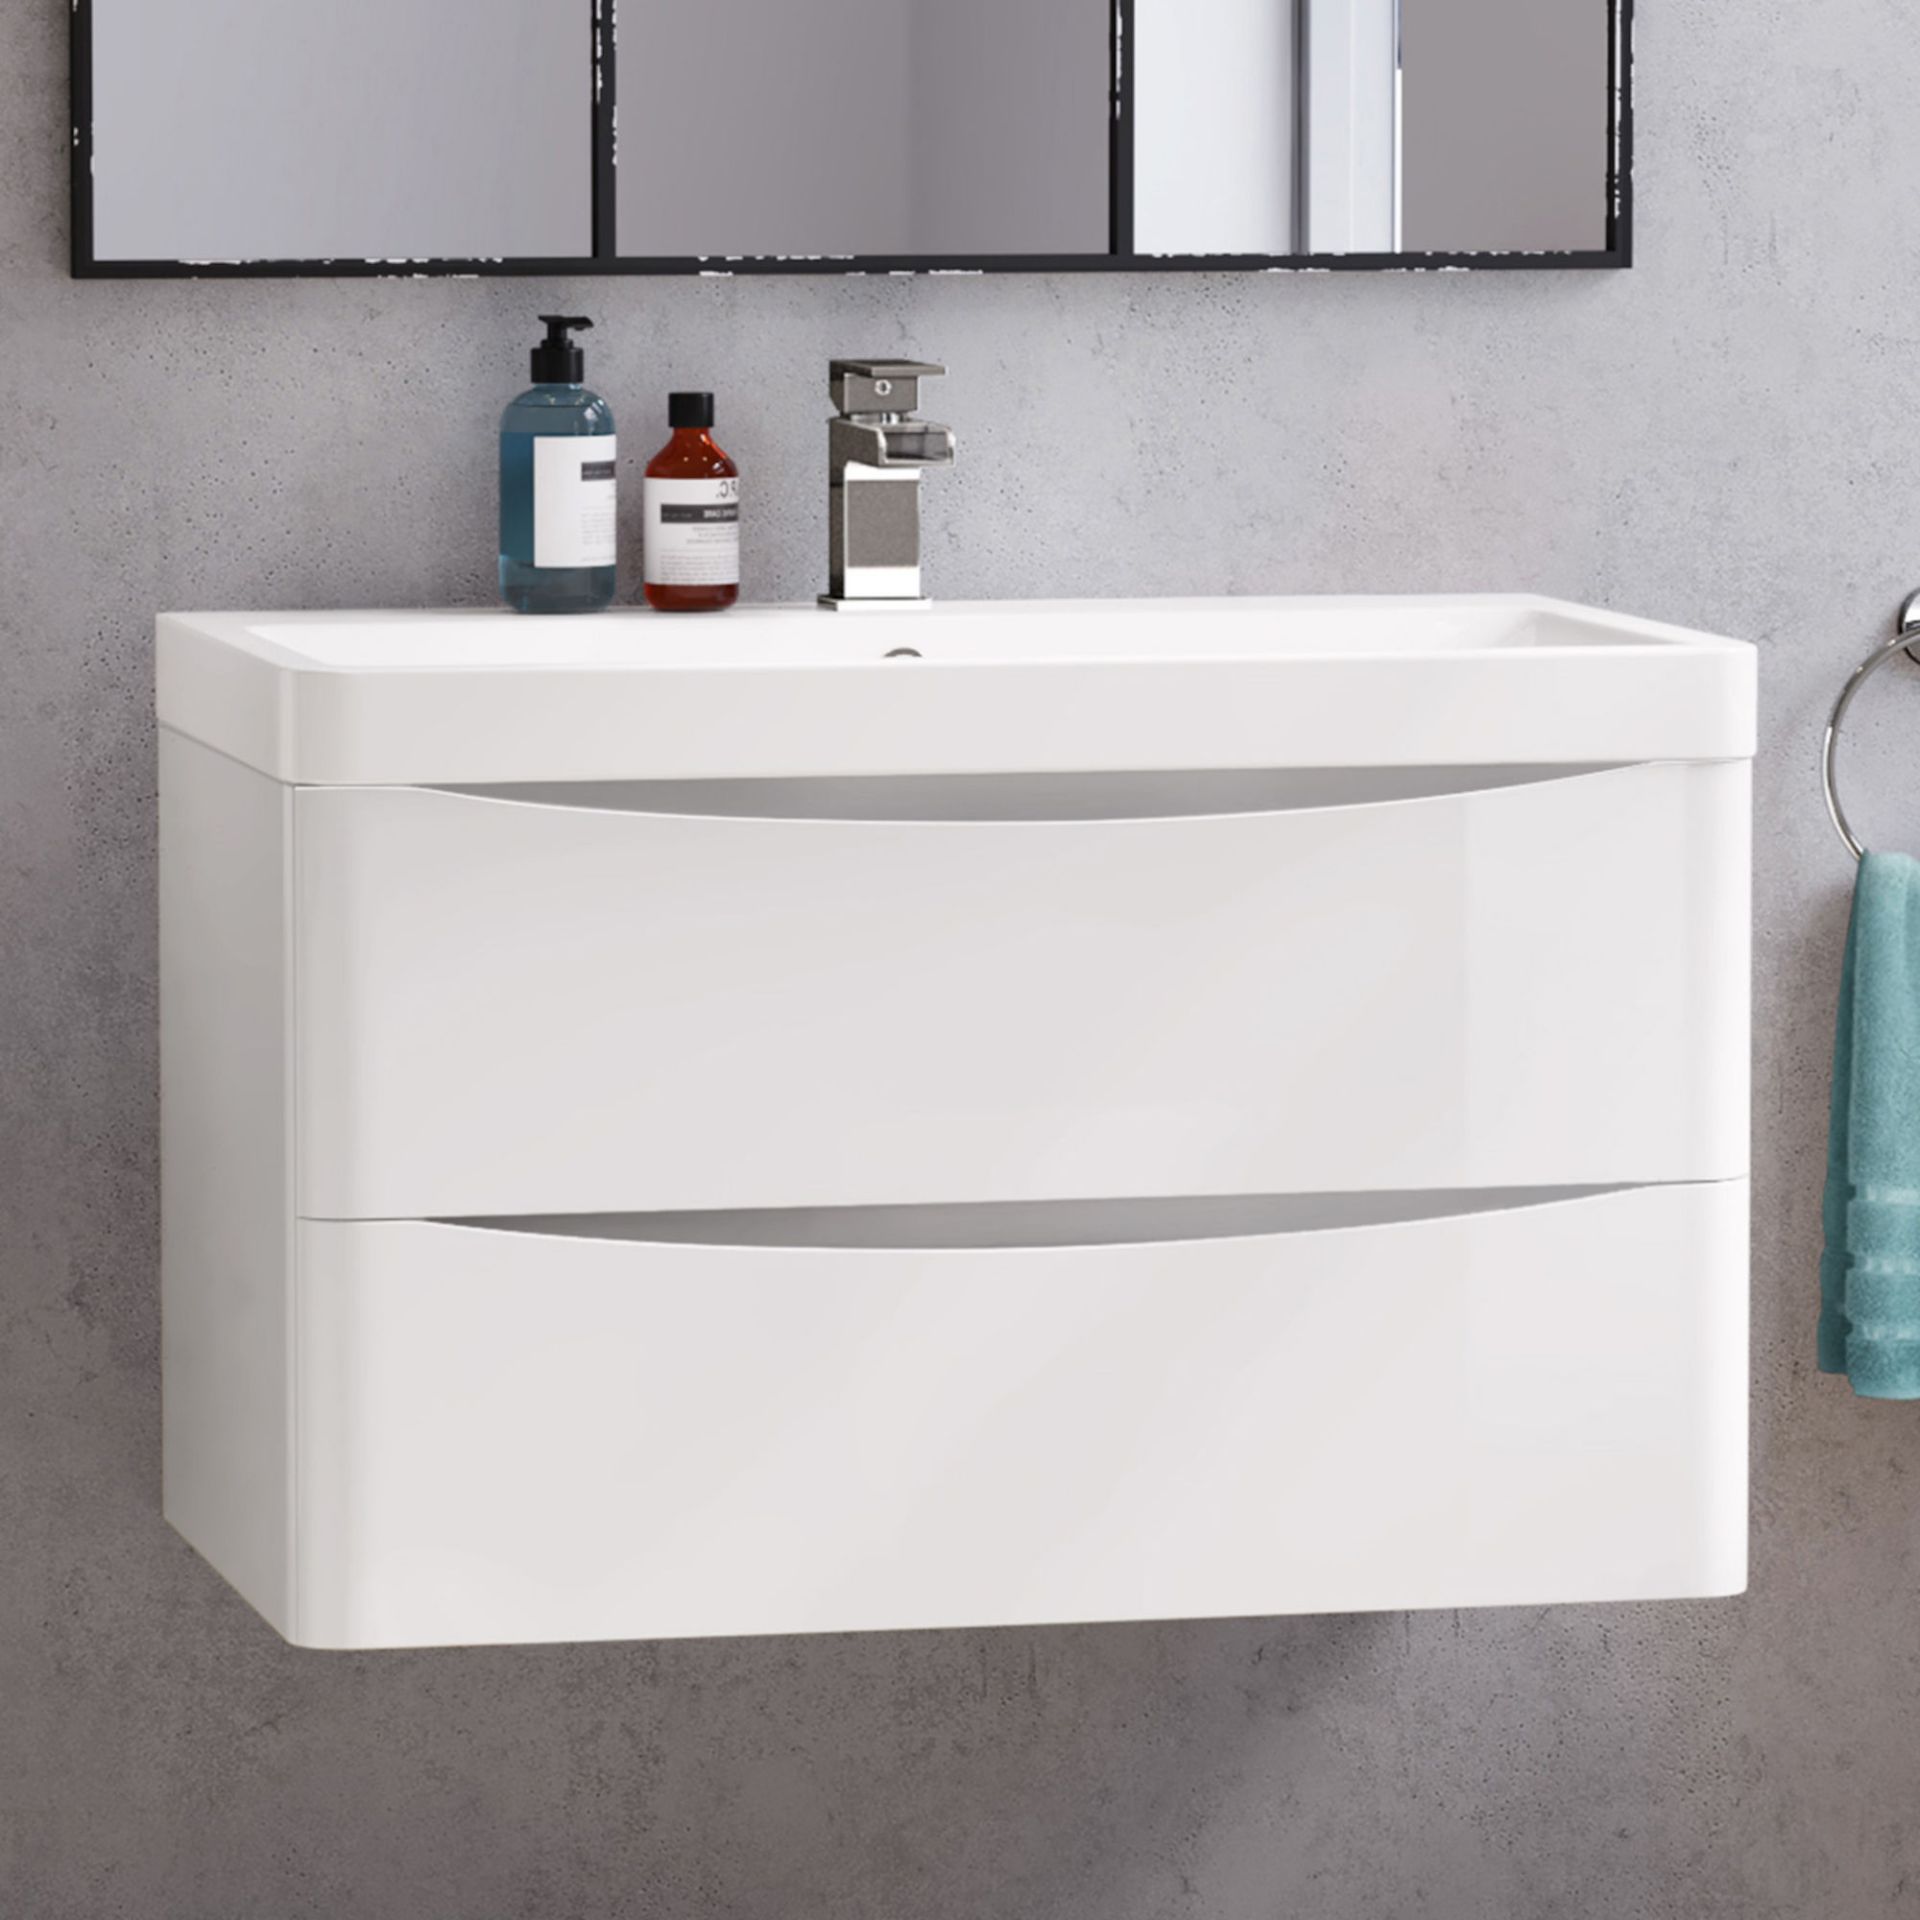 (TT31) 800mm Austin II Gloss White Built In Sink Drawer Unit - Wall Hung. RRP £549.99. This st...